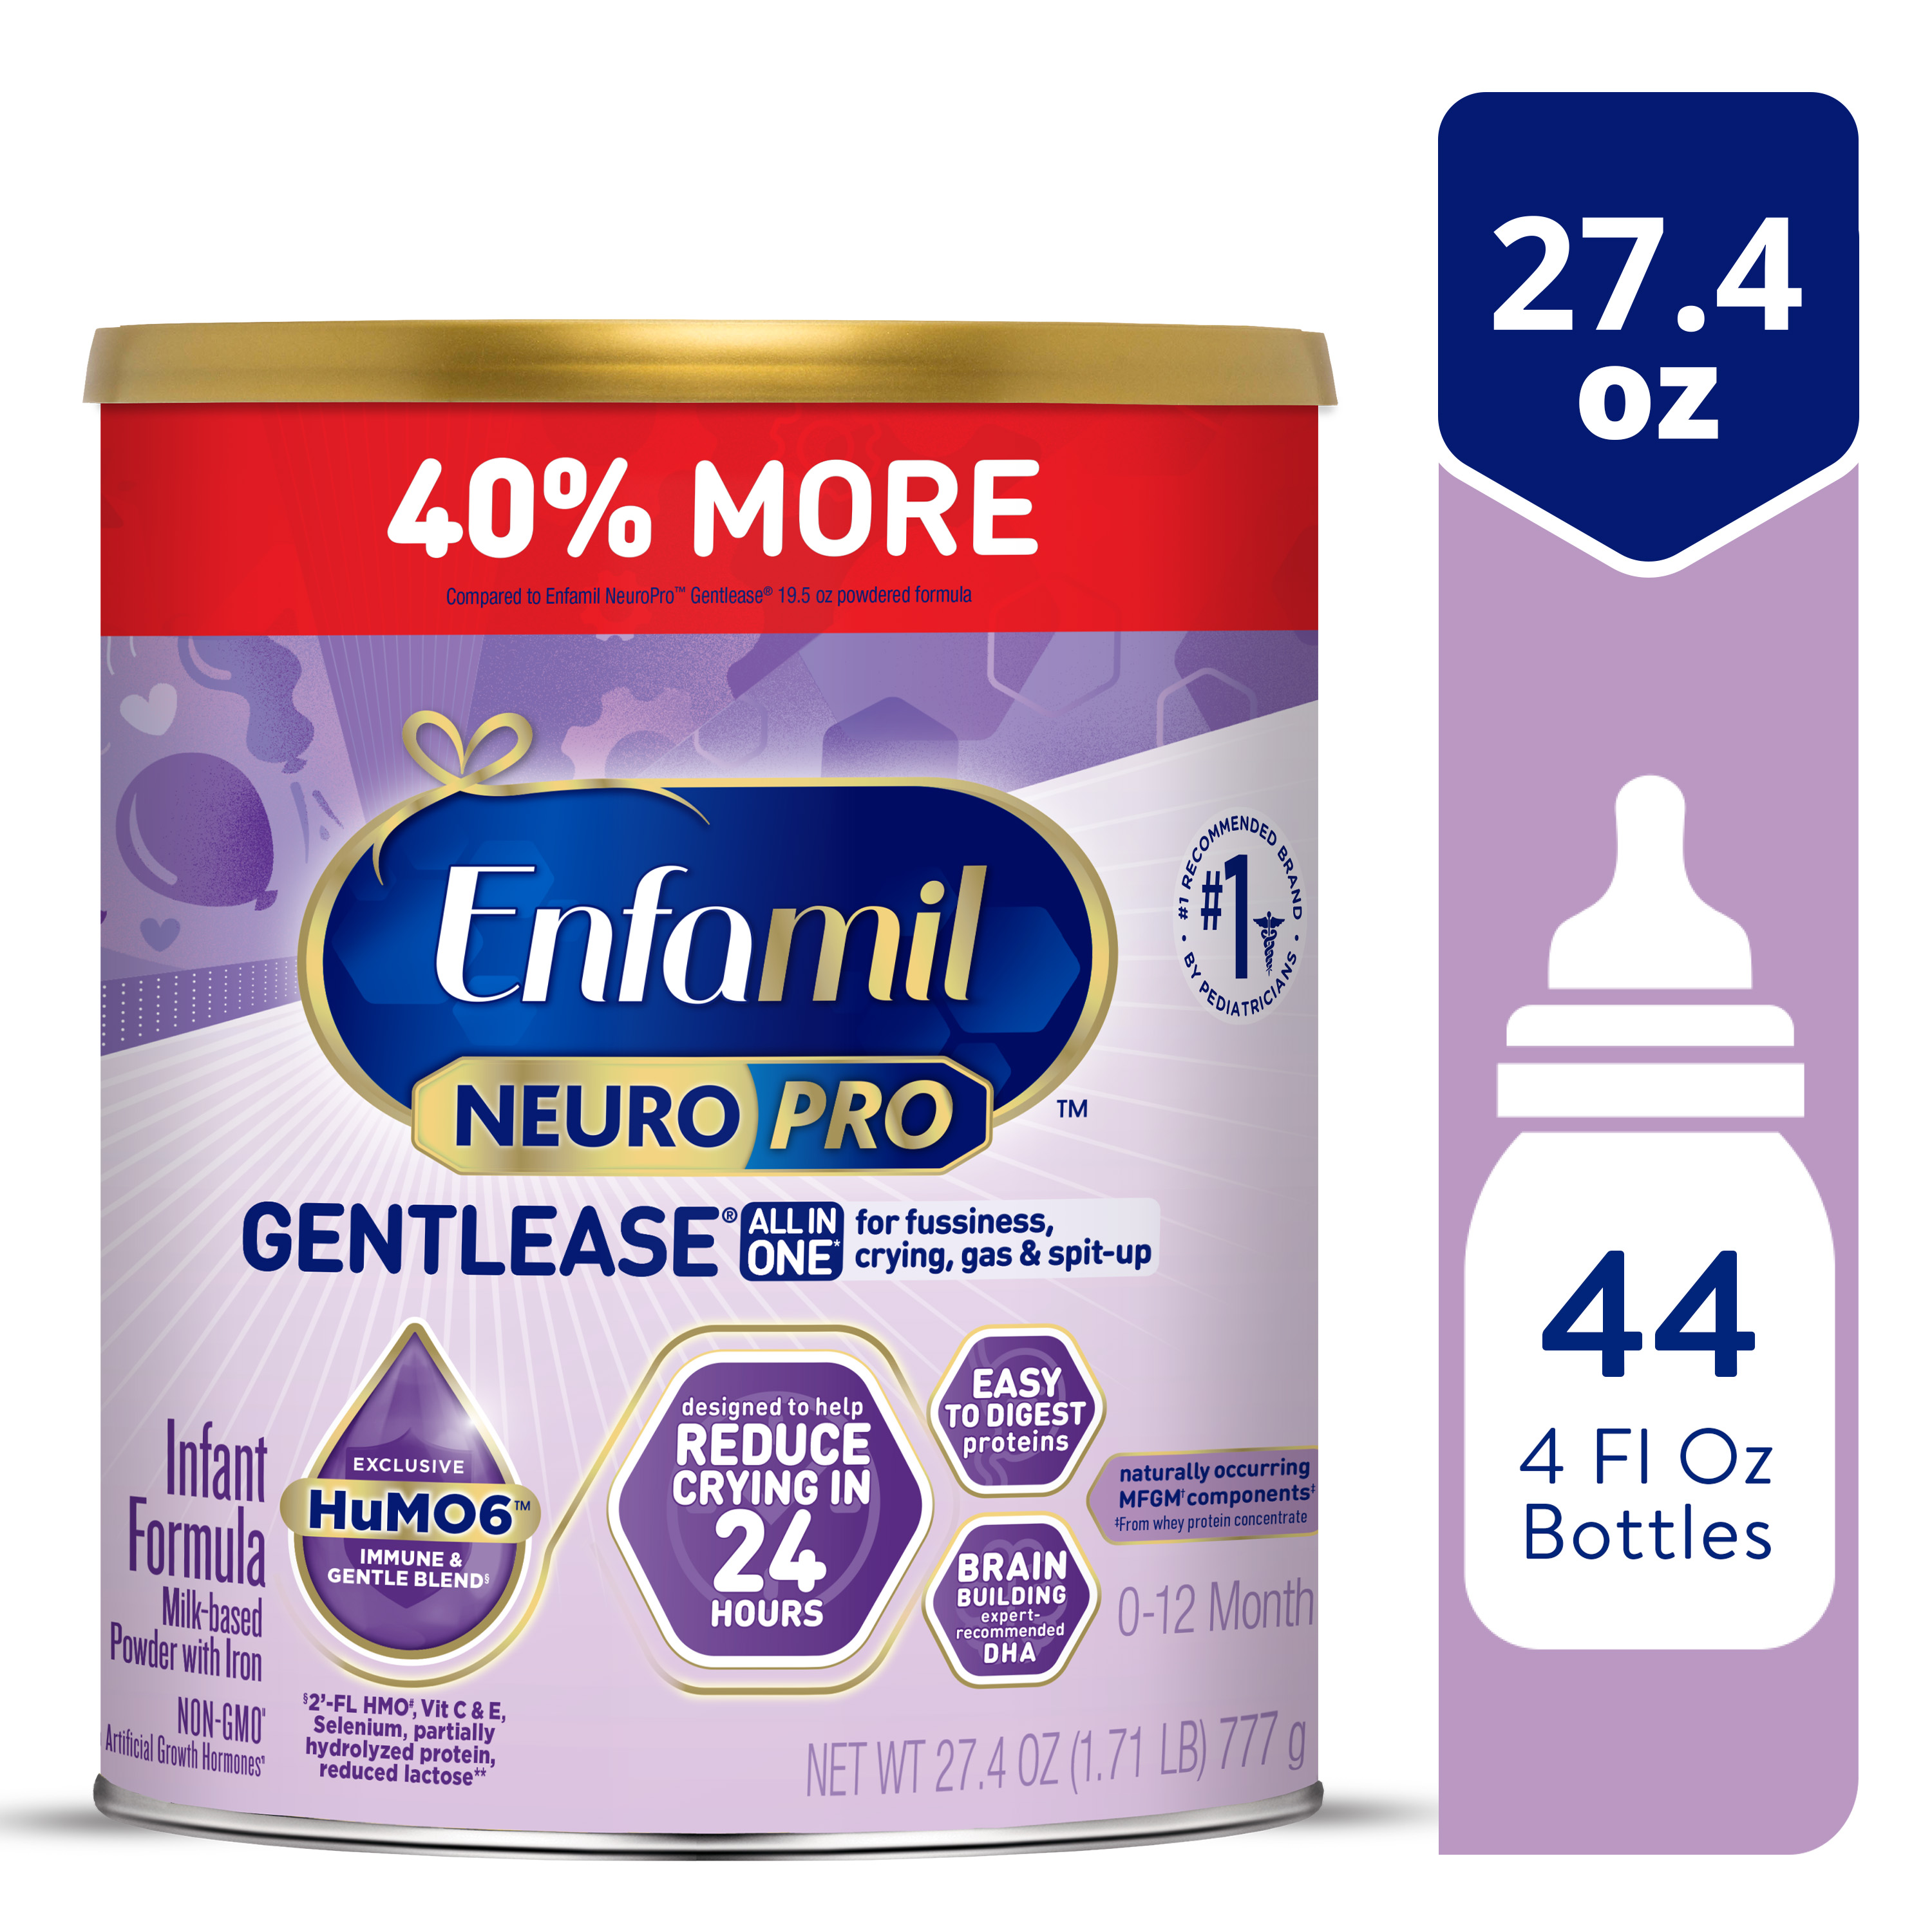  Enfamil NeuroPro Gentlease Baby Formula, Infant Formula Nutrition, Brain Support that has DHA, HuMO6 Immune Blend, Designed to Reduce Fussiness, Crying, Gas & Spit-up in 24 Hrs, Powder Can, 27.4 Oz - image 1 of 13